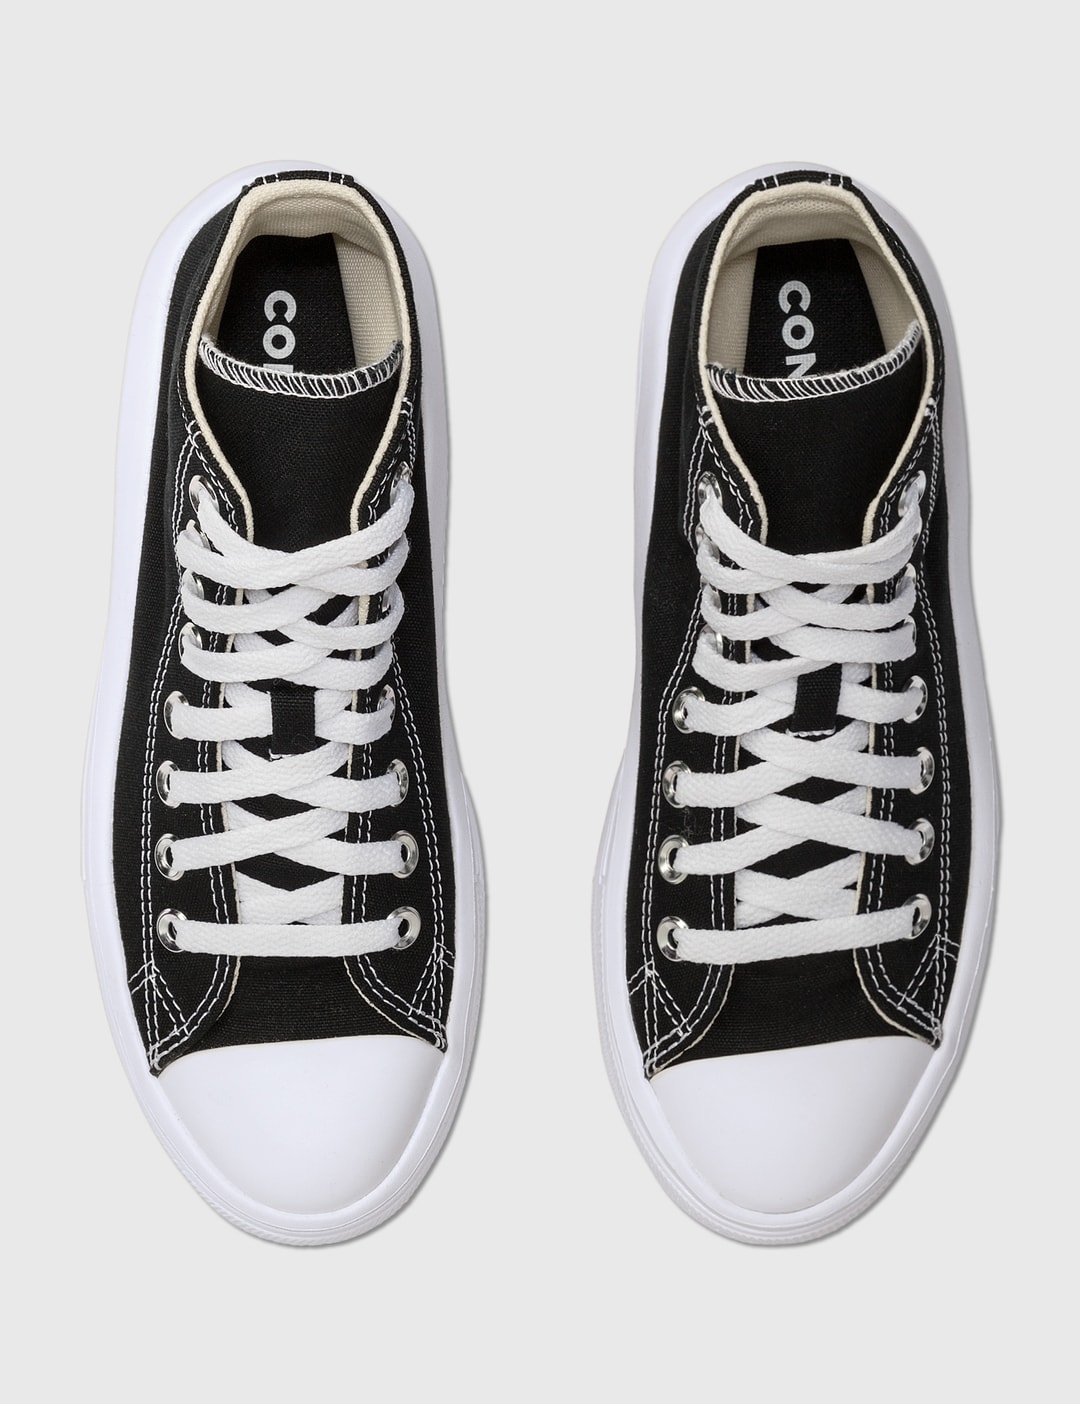 Converse - Chuck Taylor All Star High Top | HBX - Globally Curated Fashion and Lifestyle Hypebeast